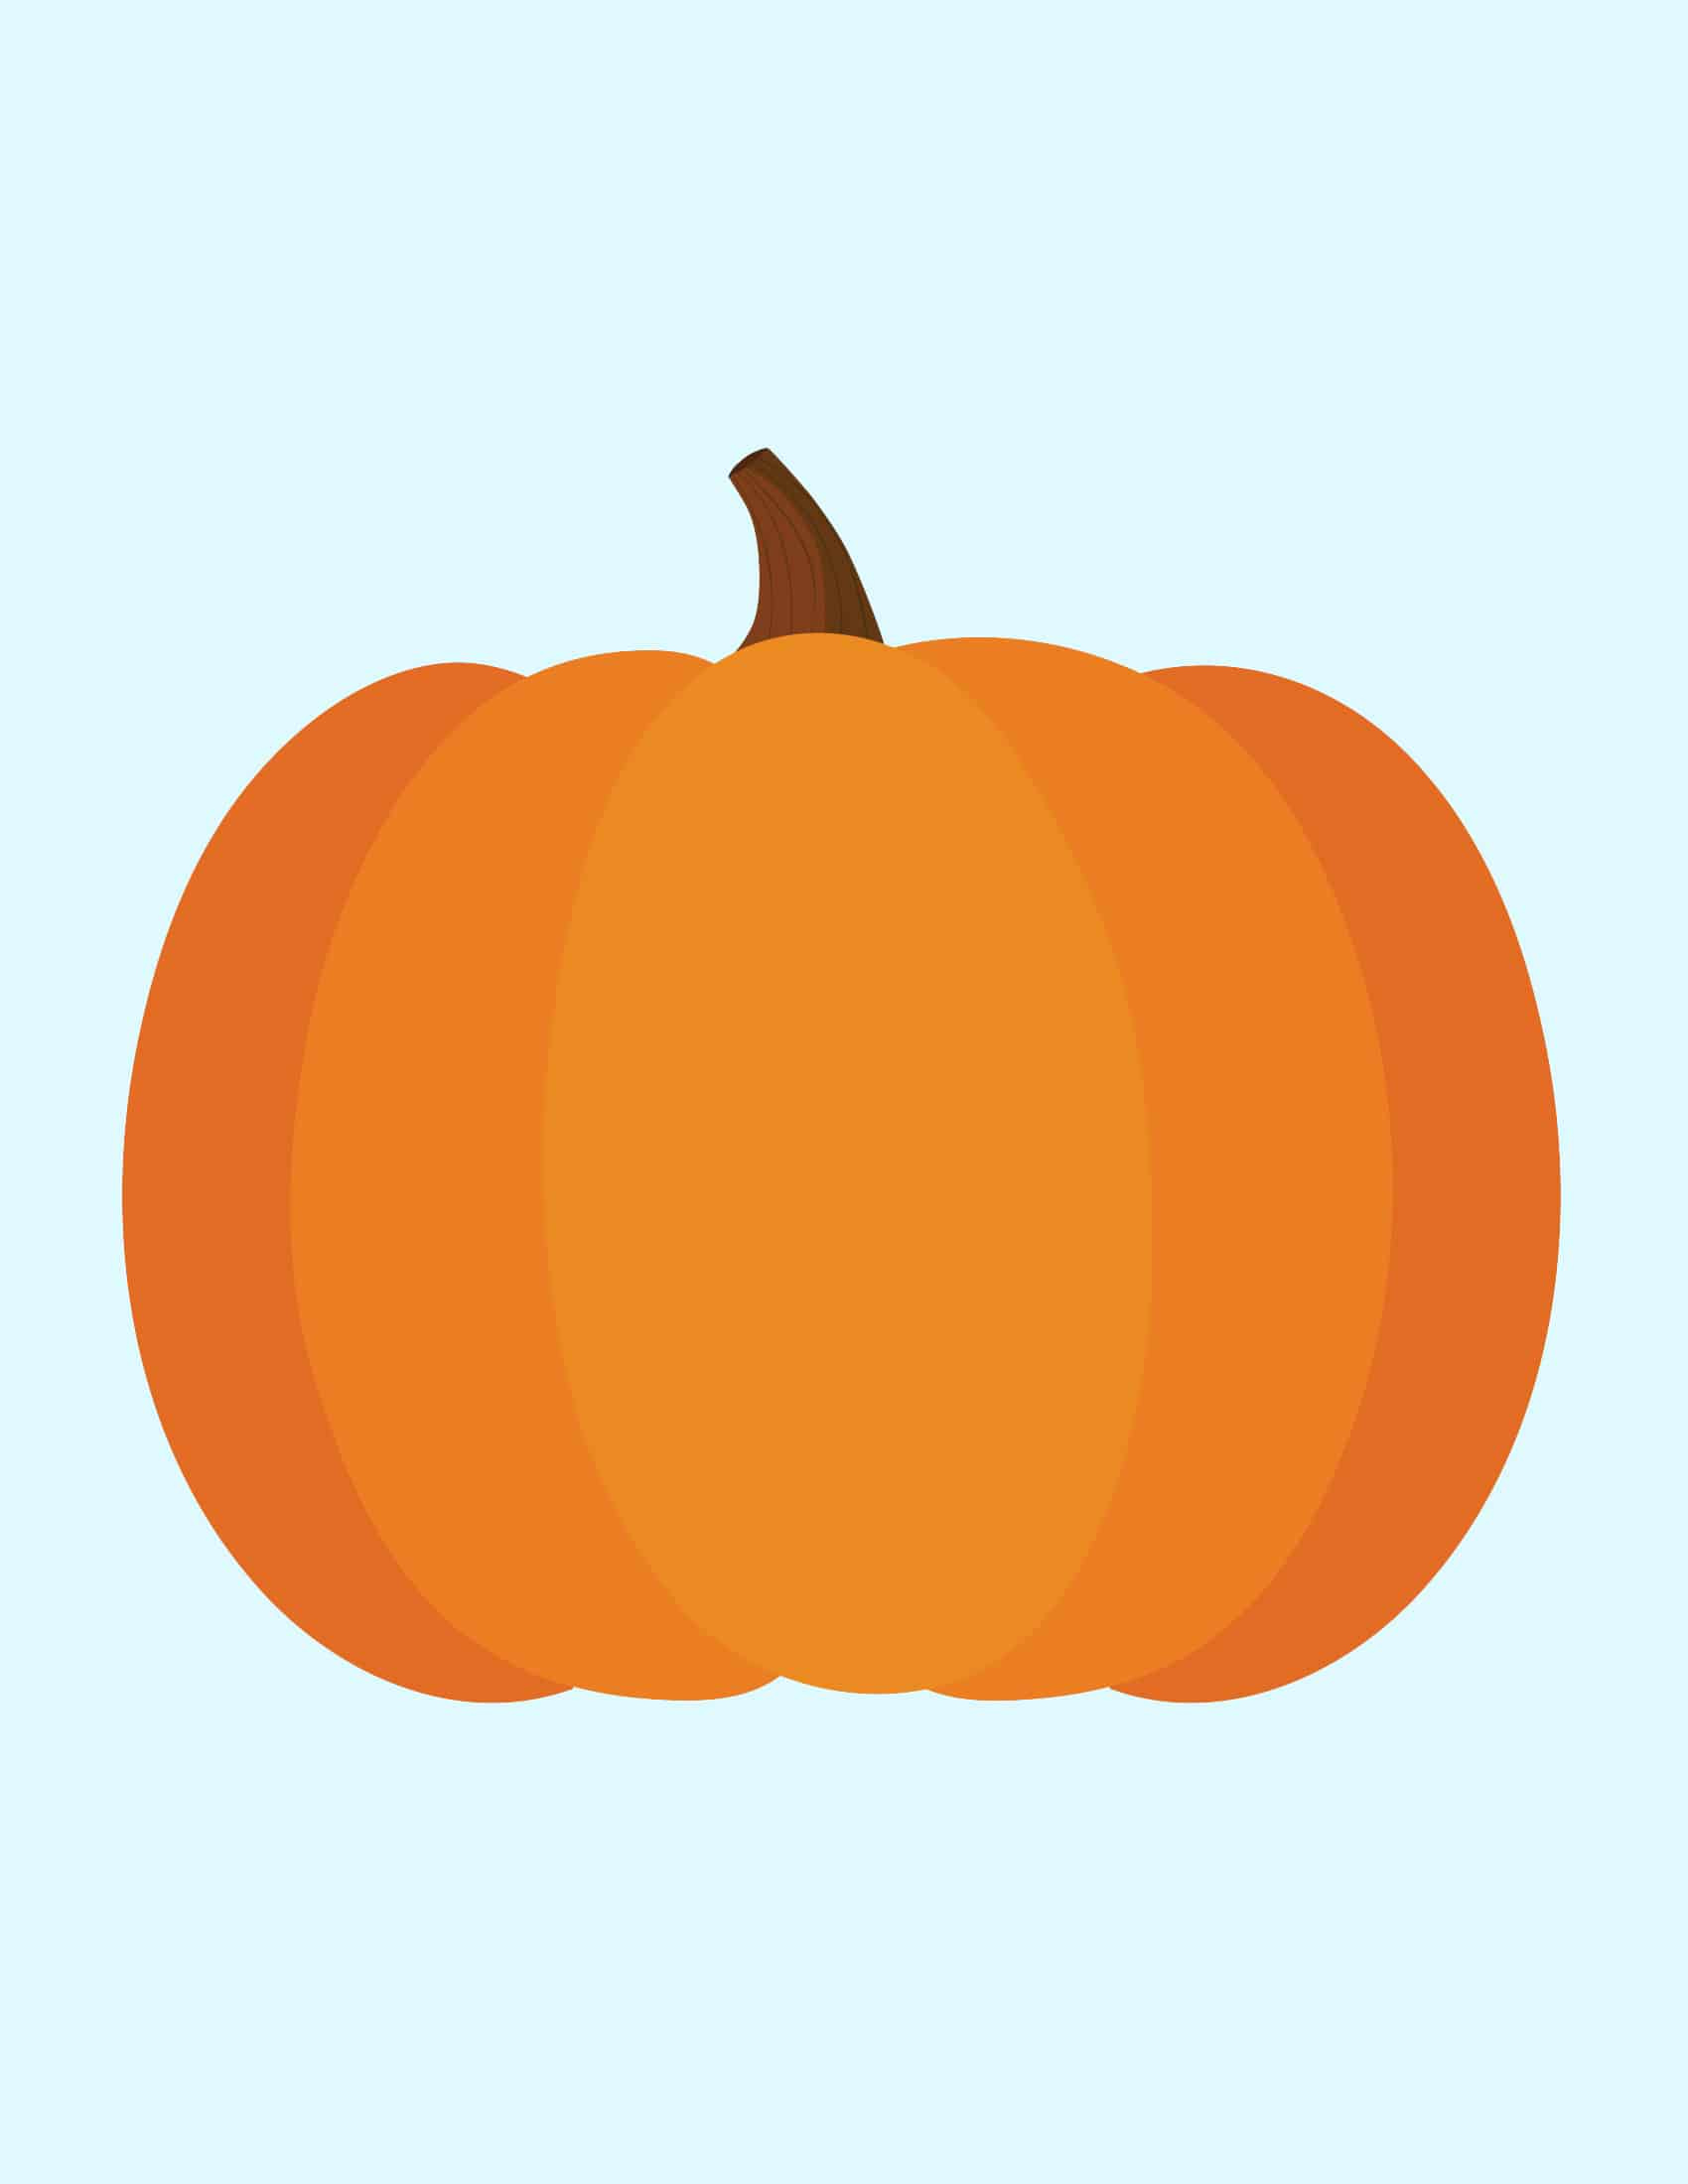 Pumpkin Pictures To Print Out